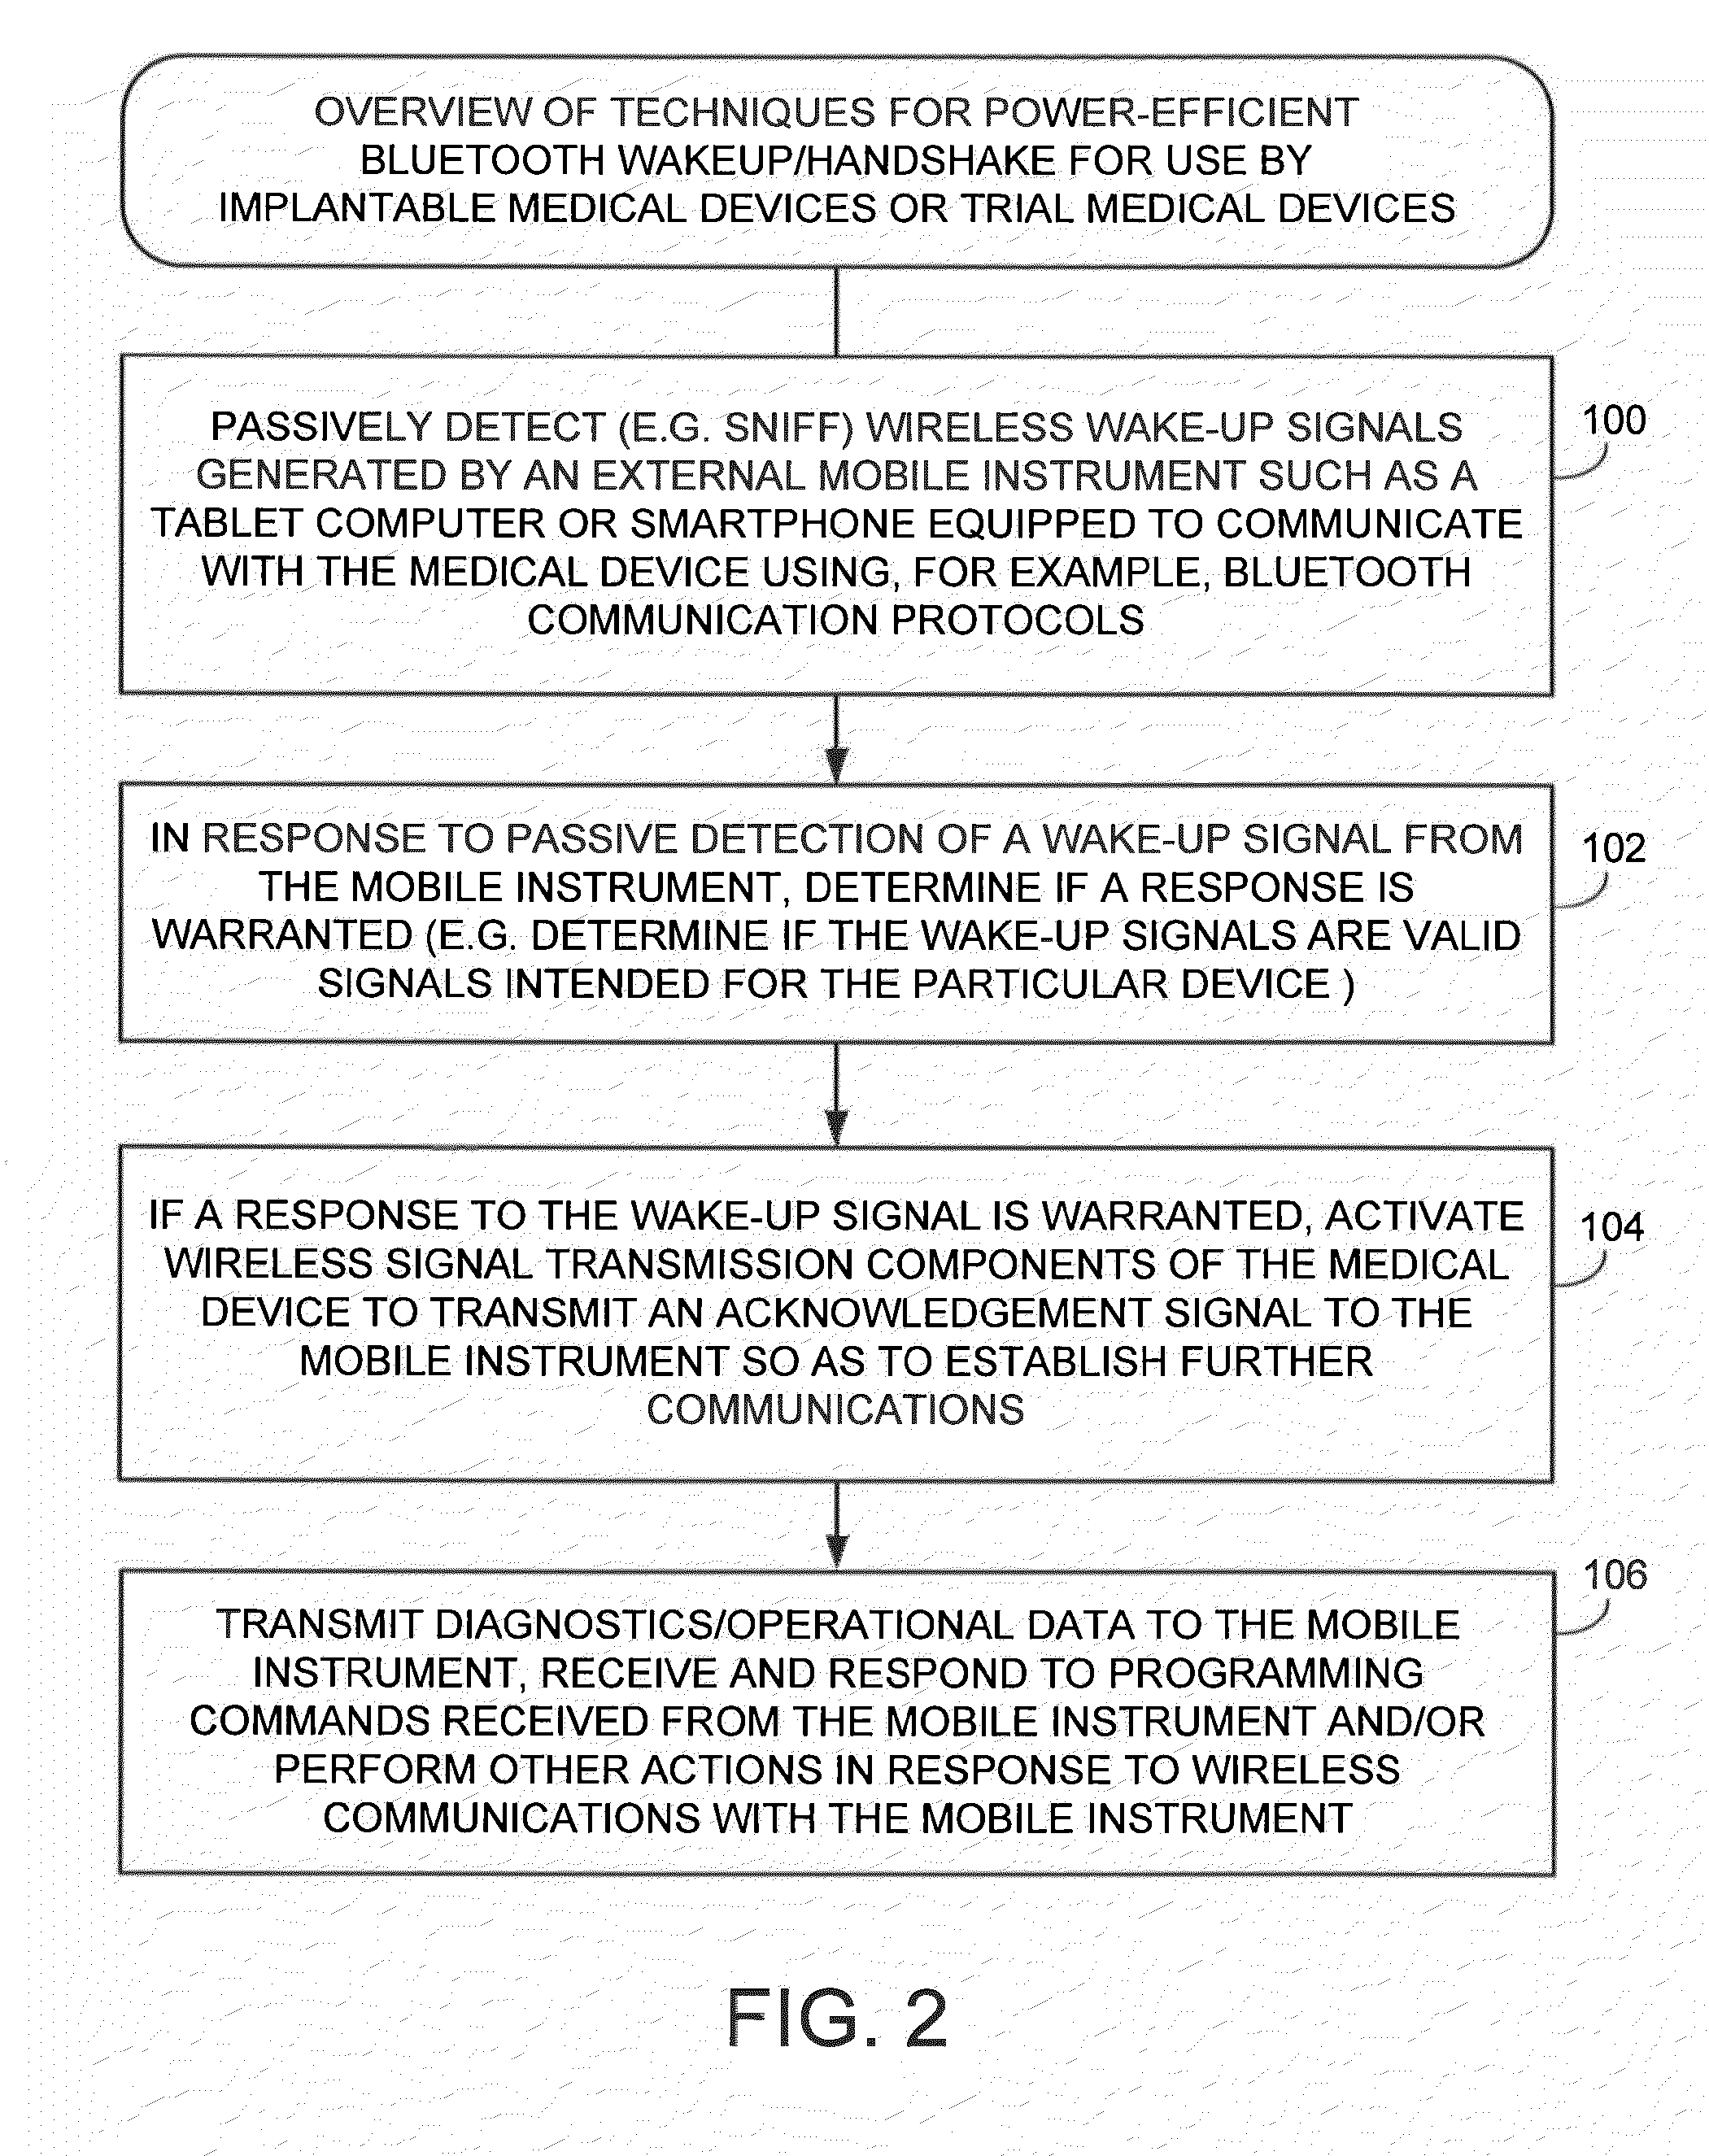 Systems and methods for low energy wake-up and pairing for use with implantable medical devices